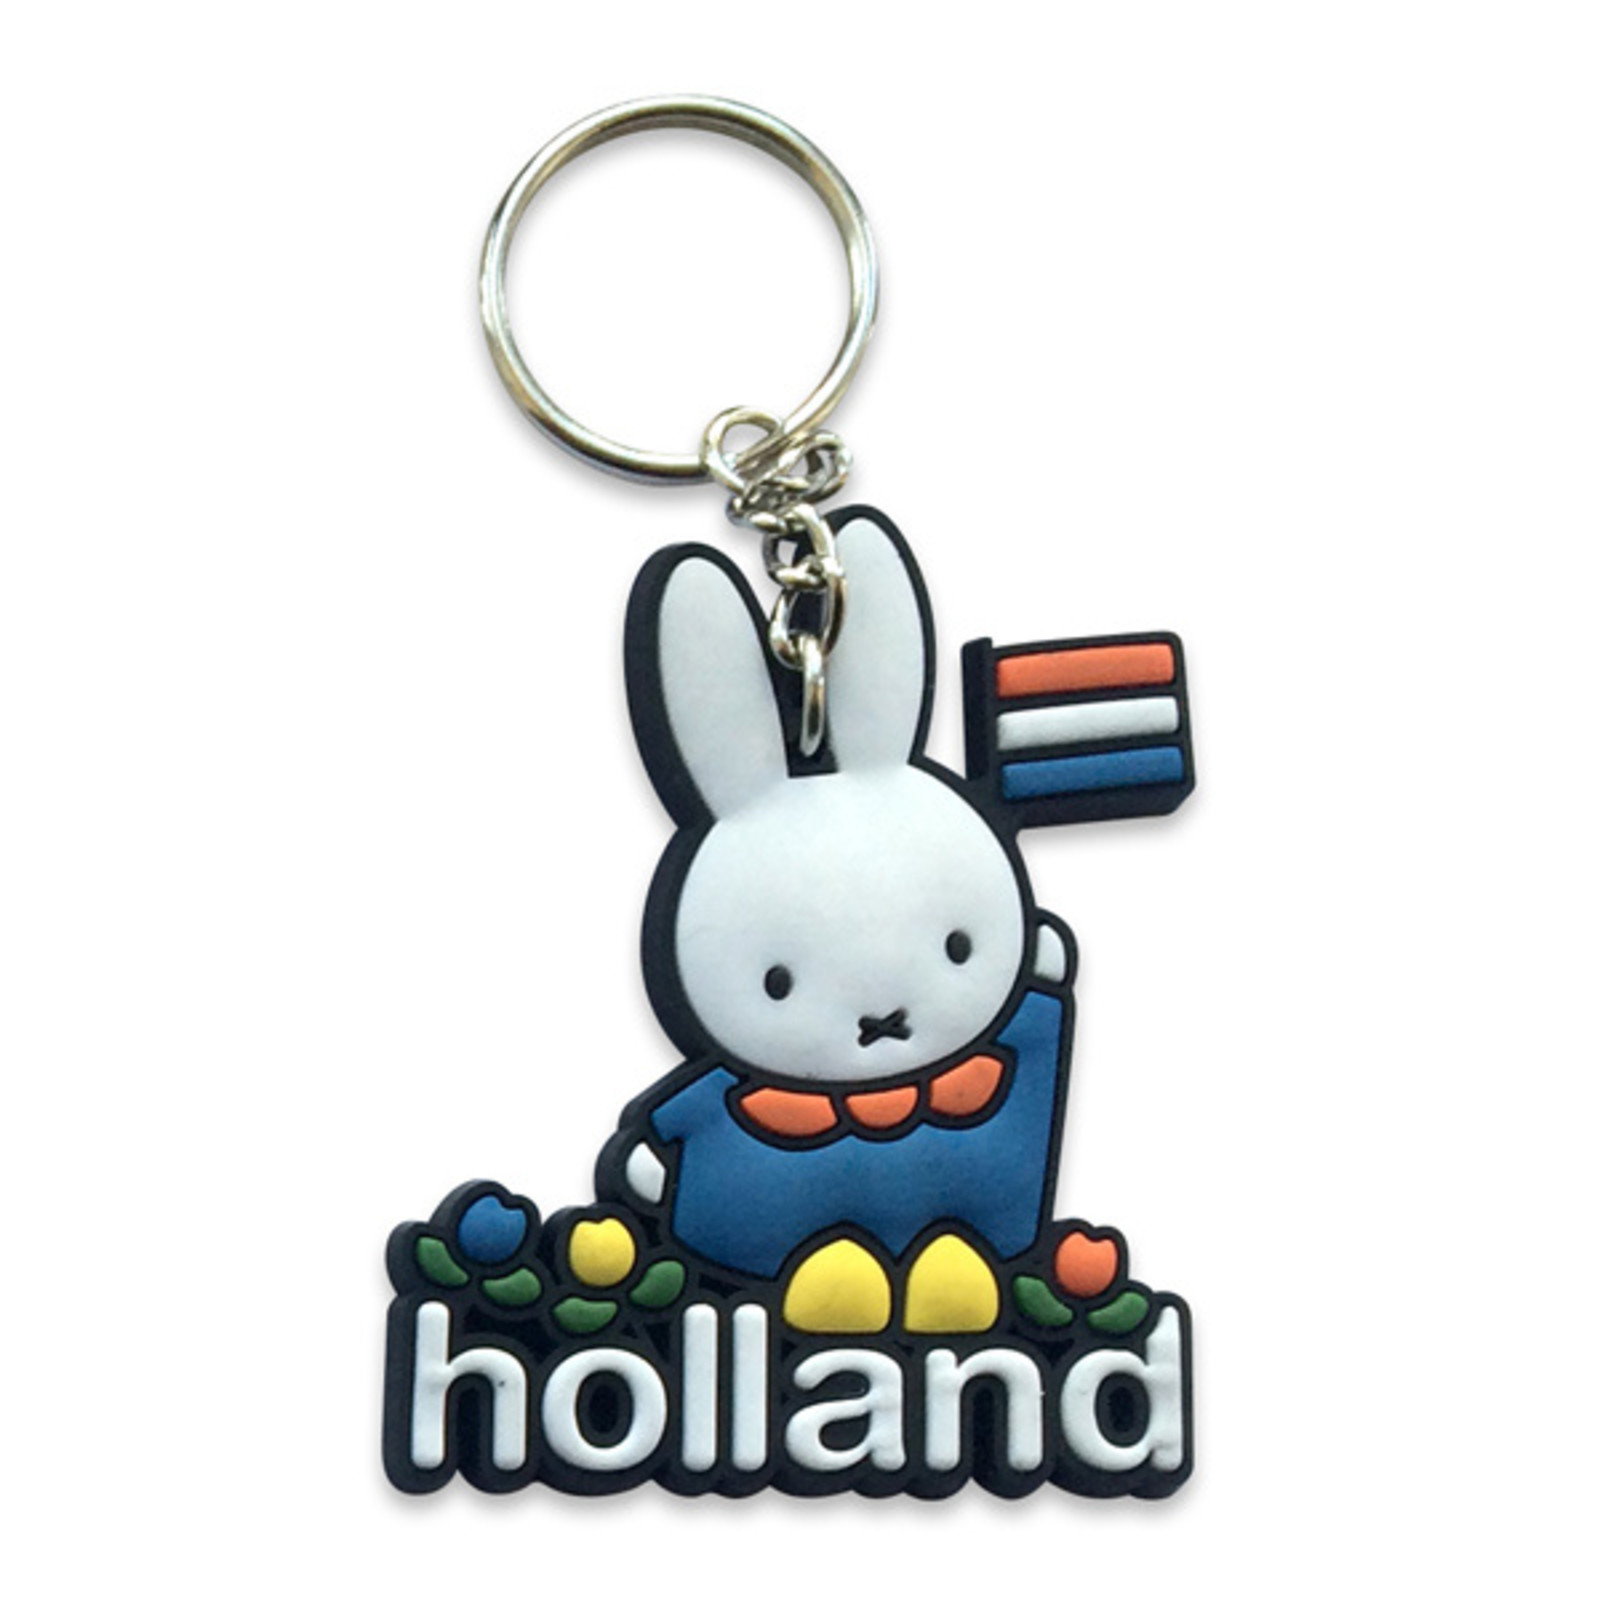 Keyring rubber miffy Holland meadow